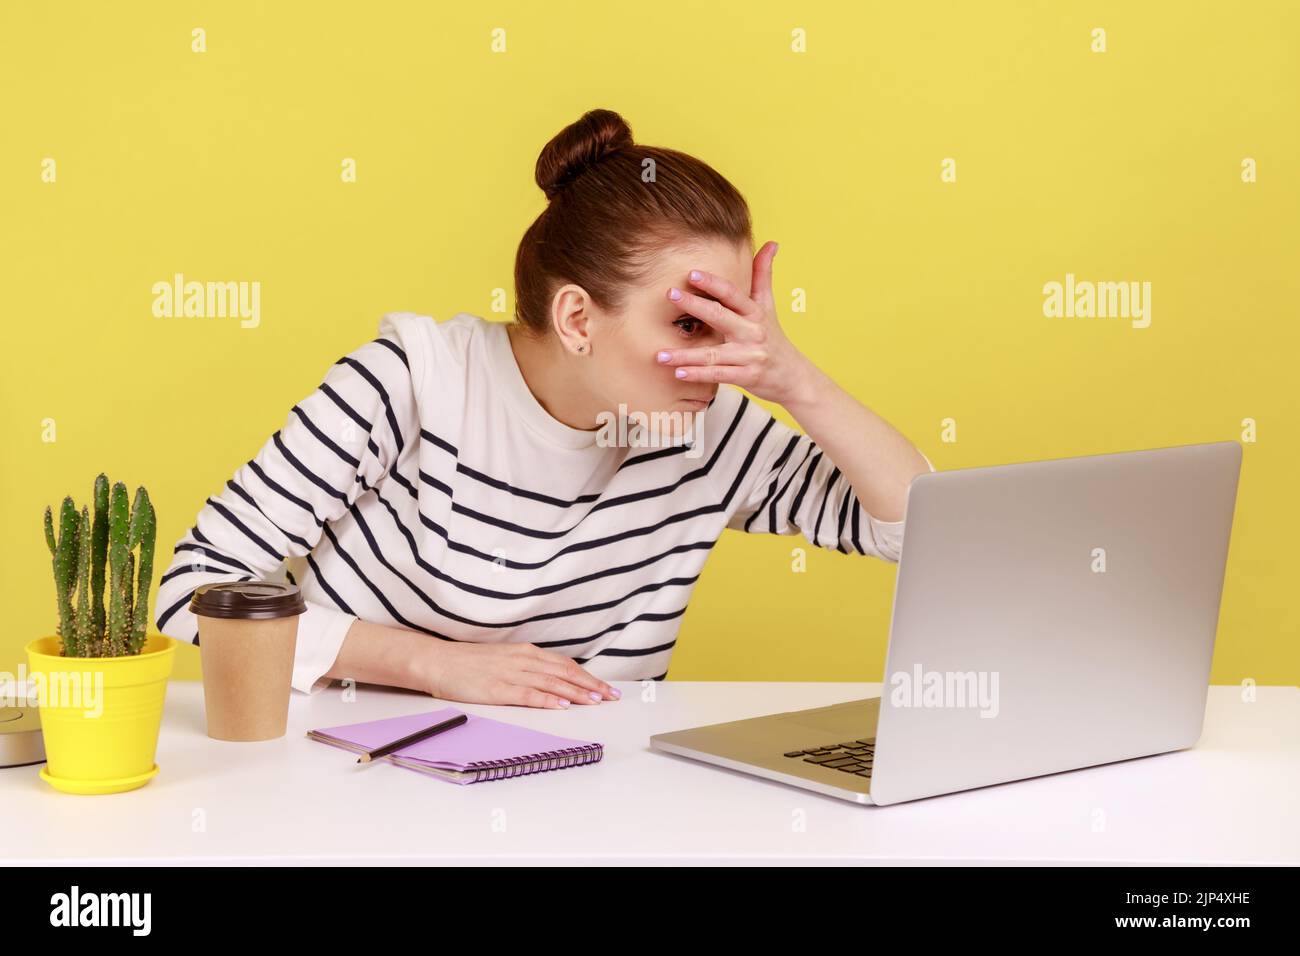 Curious woman manager sitting at workplace, spying, looking through fingers at laptop screen, peeking secret gossip in office. Indoor studio studio shot isolated on yellow background. Stock Photo